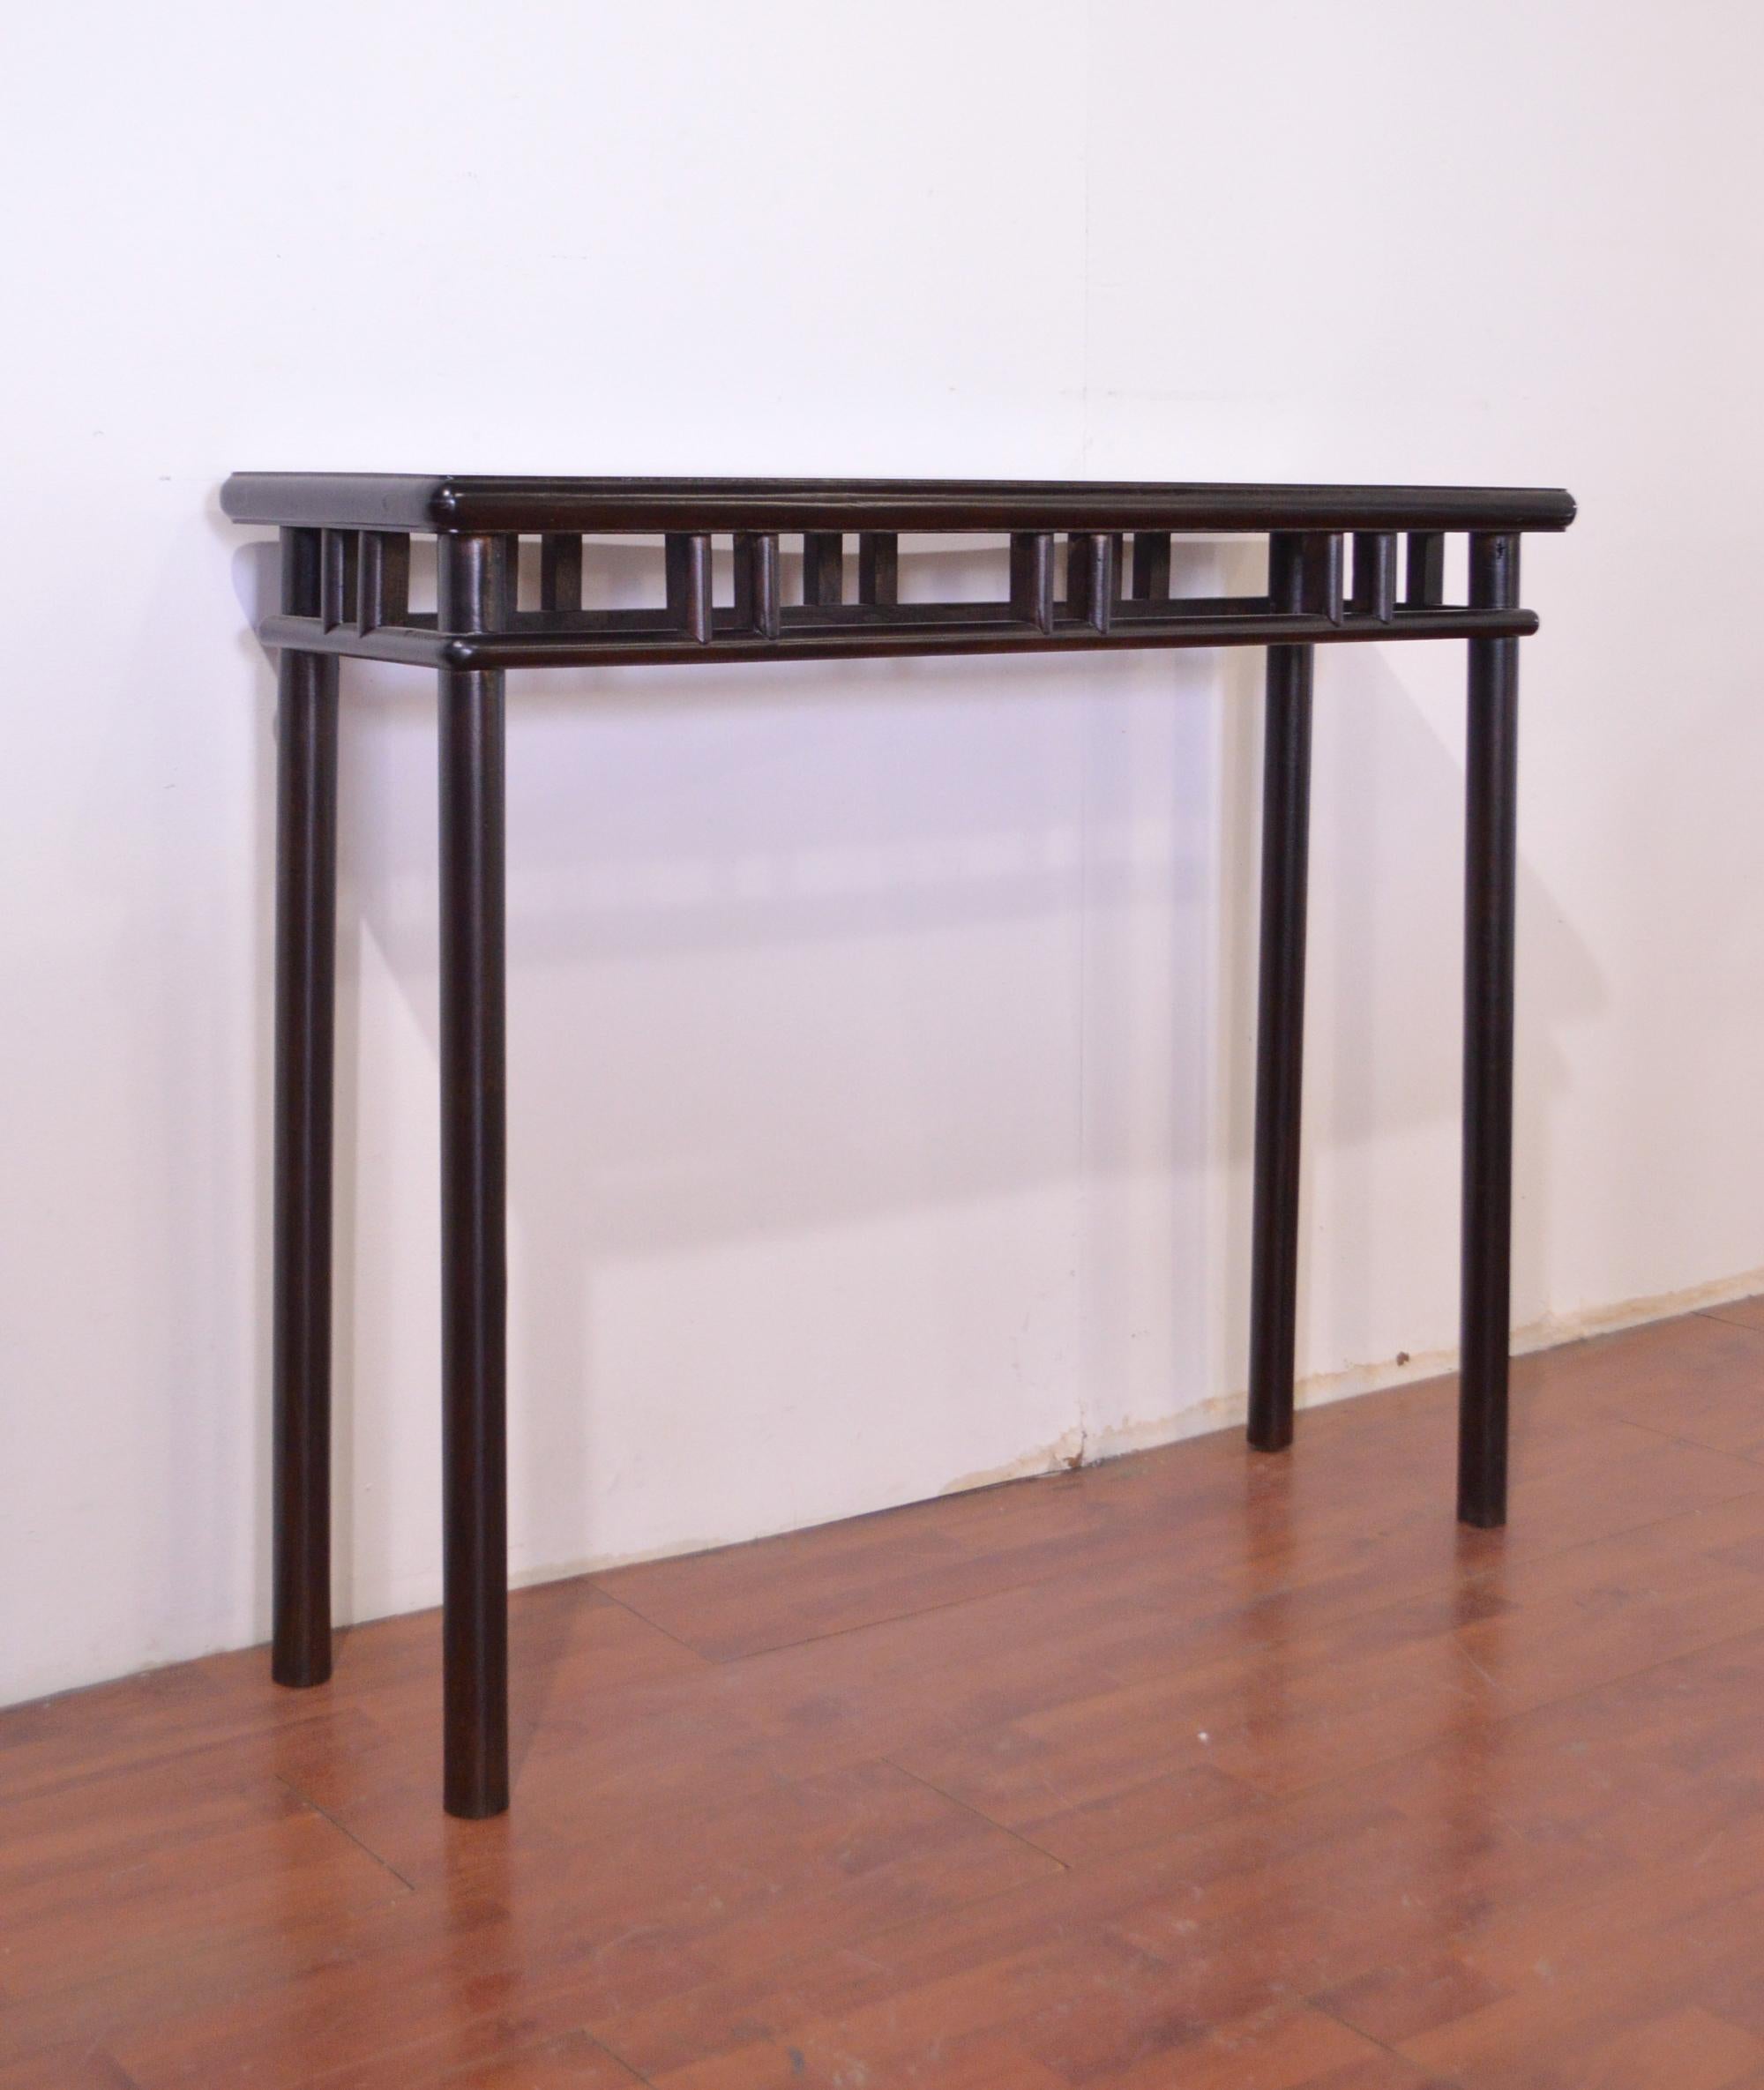 This late 19th century black lacquered consolle in elm wood is definetely a versatile and necessary element. Used as a side table, it was constructed with the round legs found in much of the furniture from the Shandong province; the top is a panel